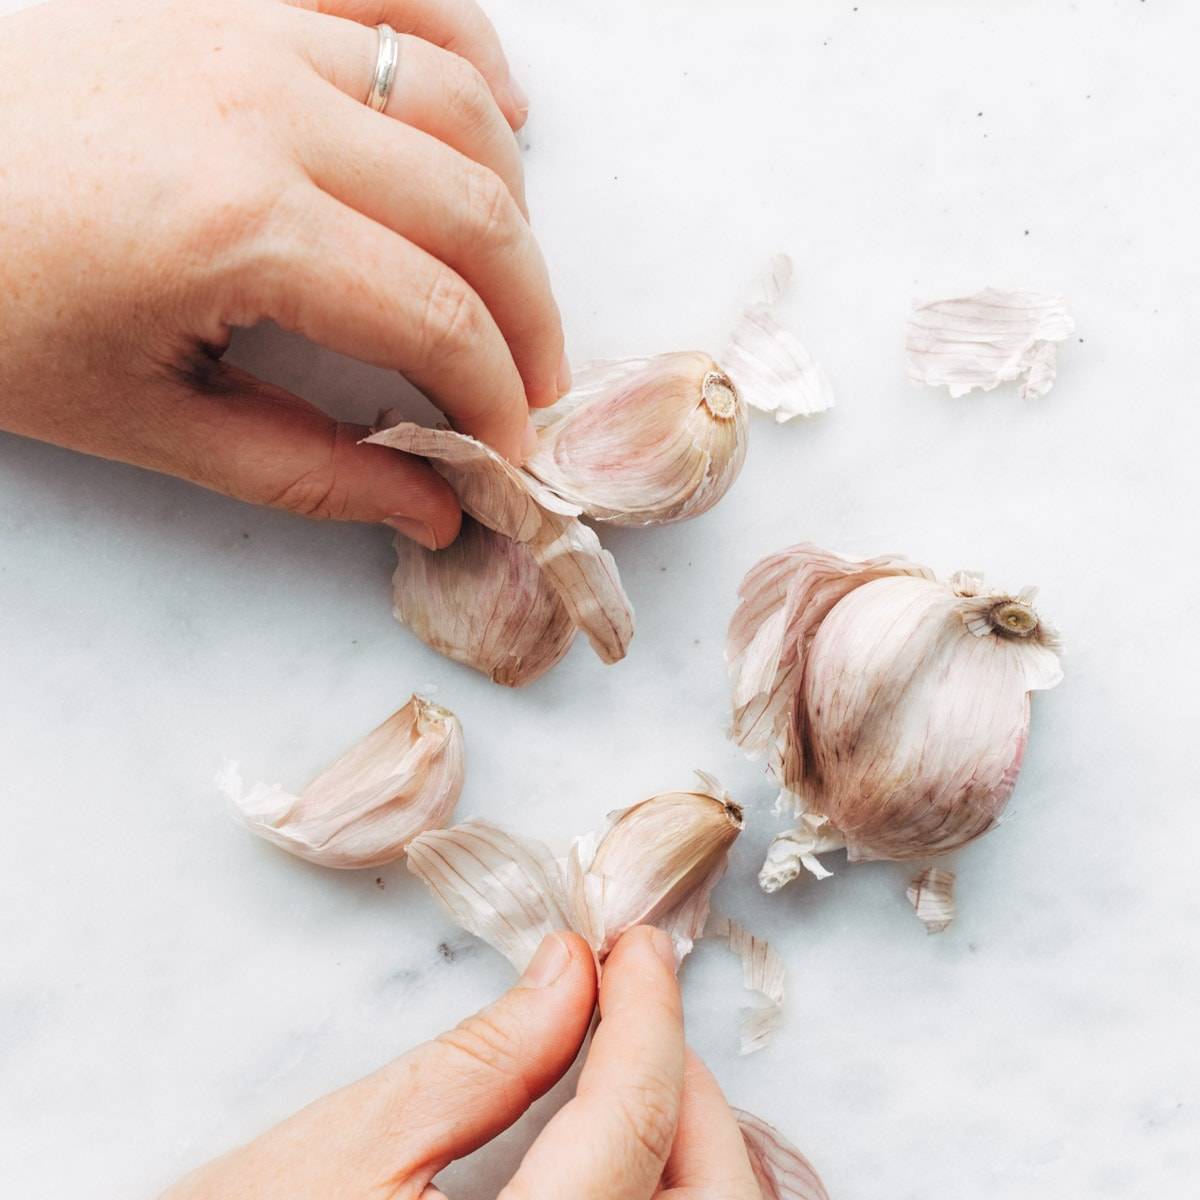 Cloves of garlic being peeled.